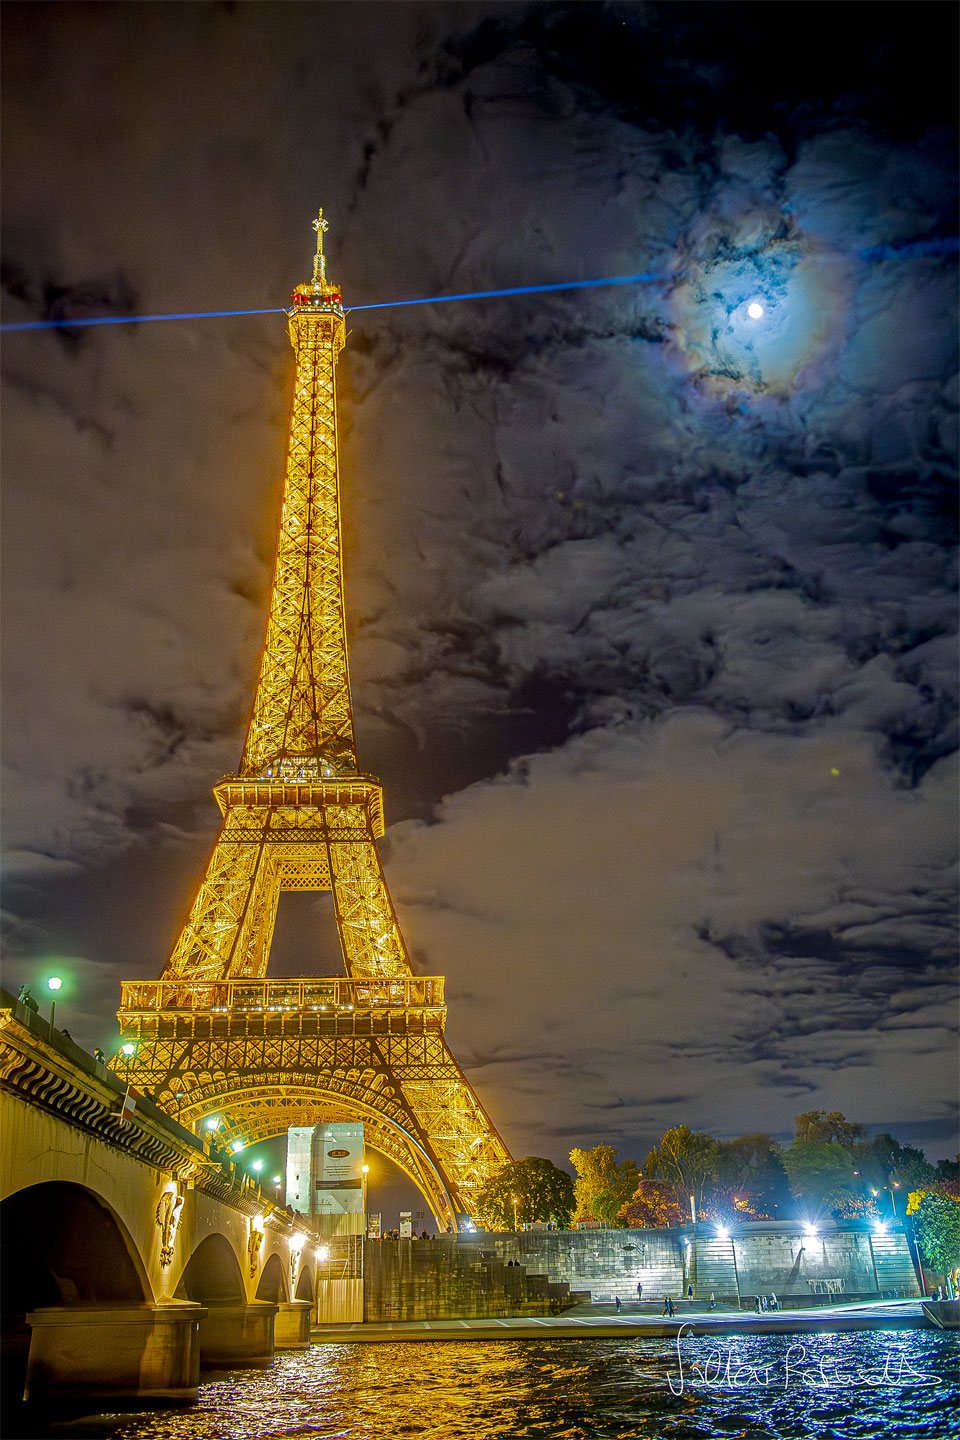 The famous Eiffel Tower in Paris, France is pictured 
on the left lit up in gold at night. A blue laser shines
out from the top. Clouds dot the background sky. The Moon
is also visible through the clouds, but is circled by 
colourful rings: a lunar corona.
Please see the explanation for more detailed information.